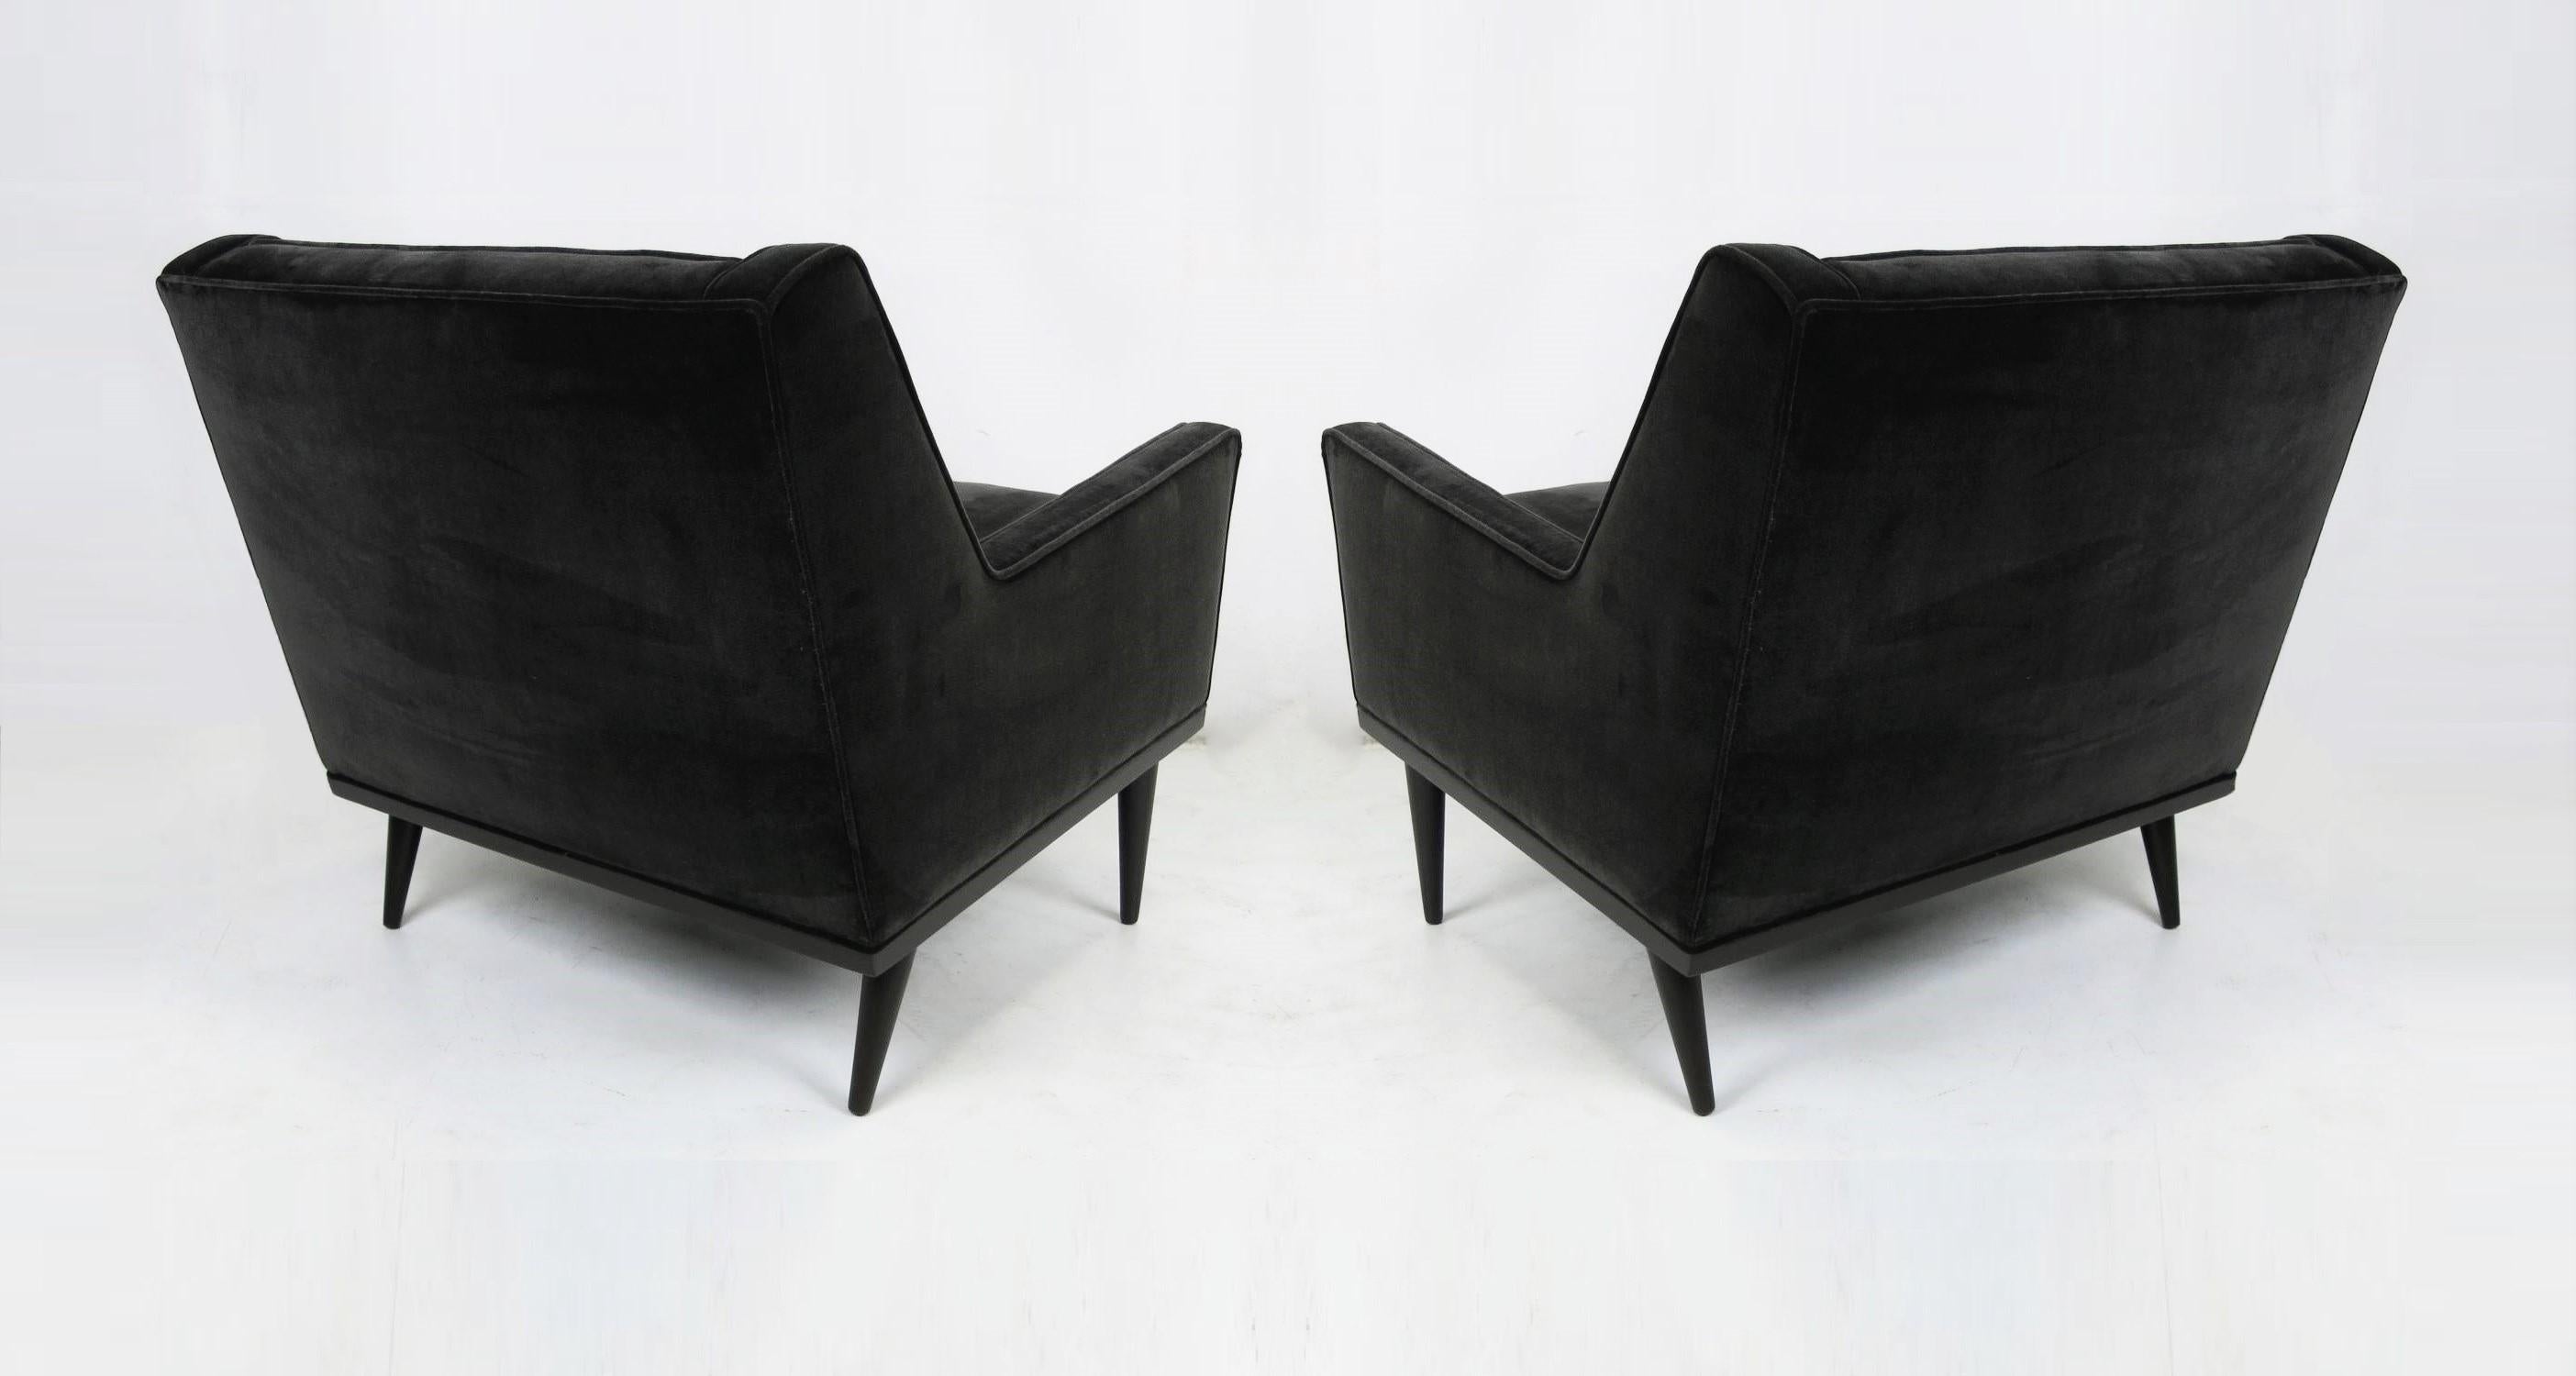 American Pair of Milo Baughman for James Inc Lounge Chairs